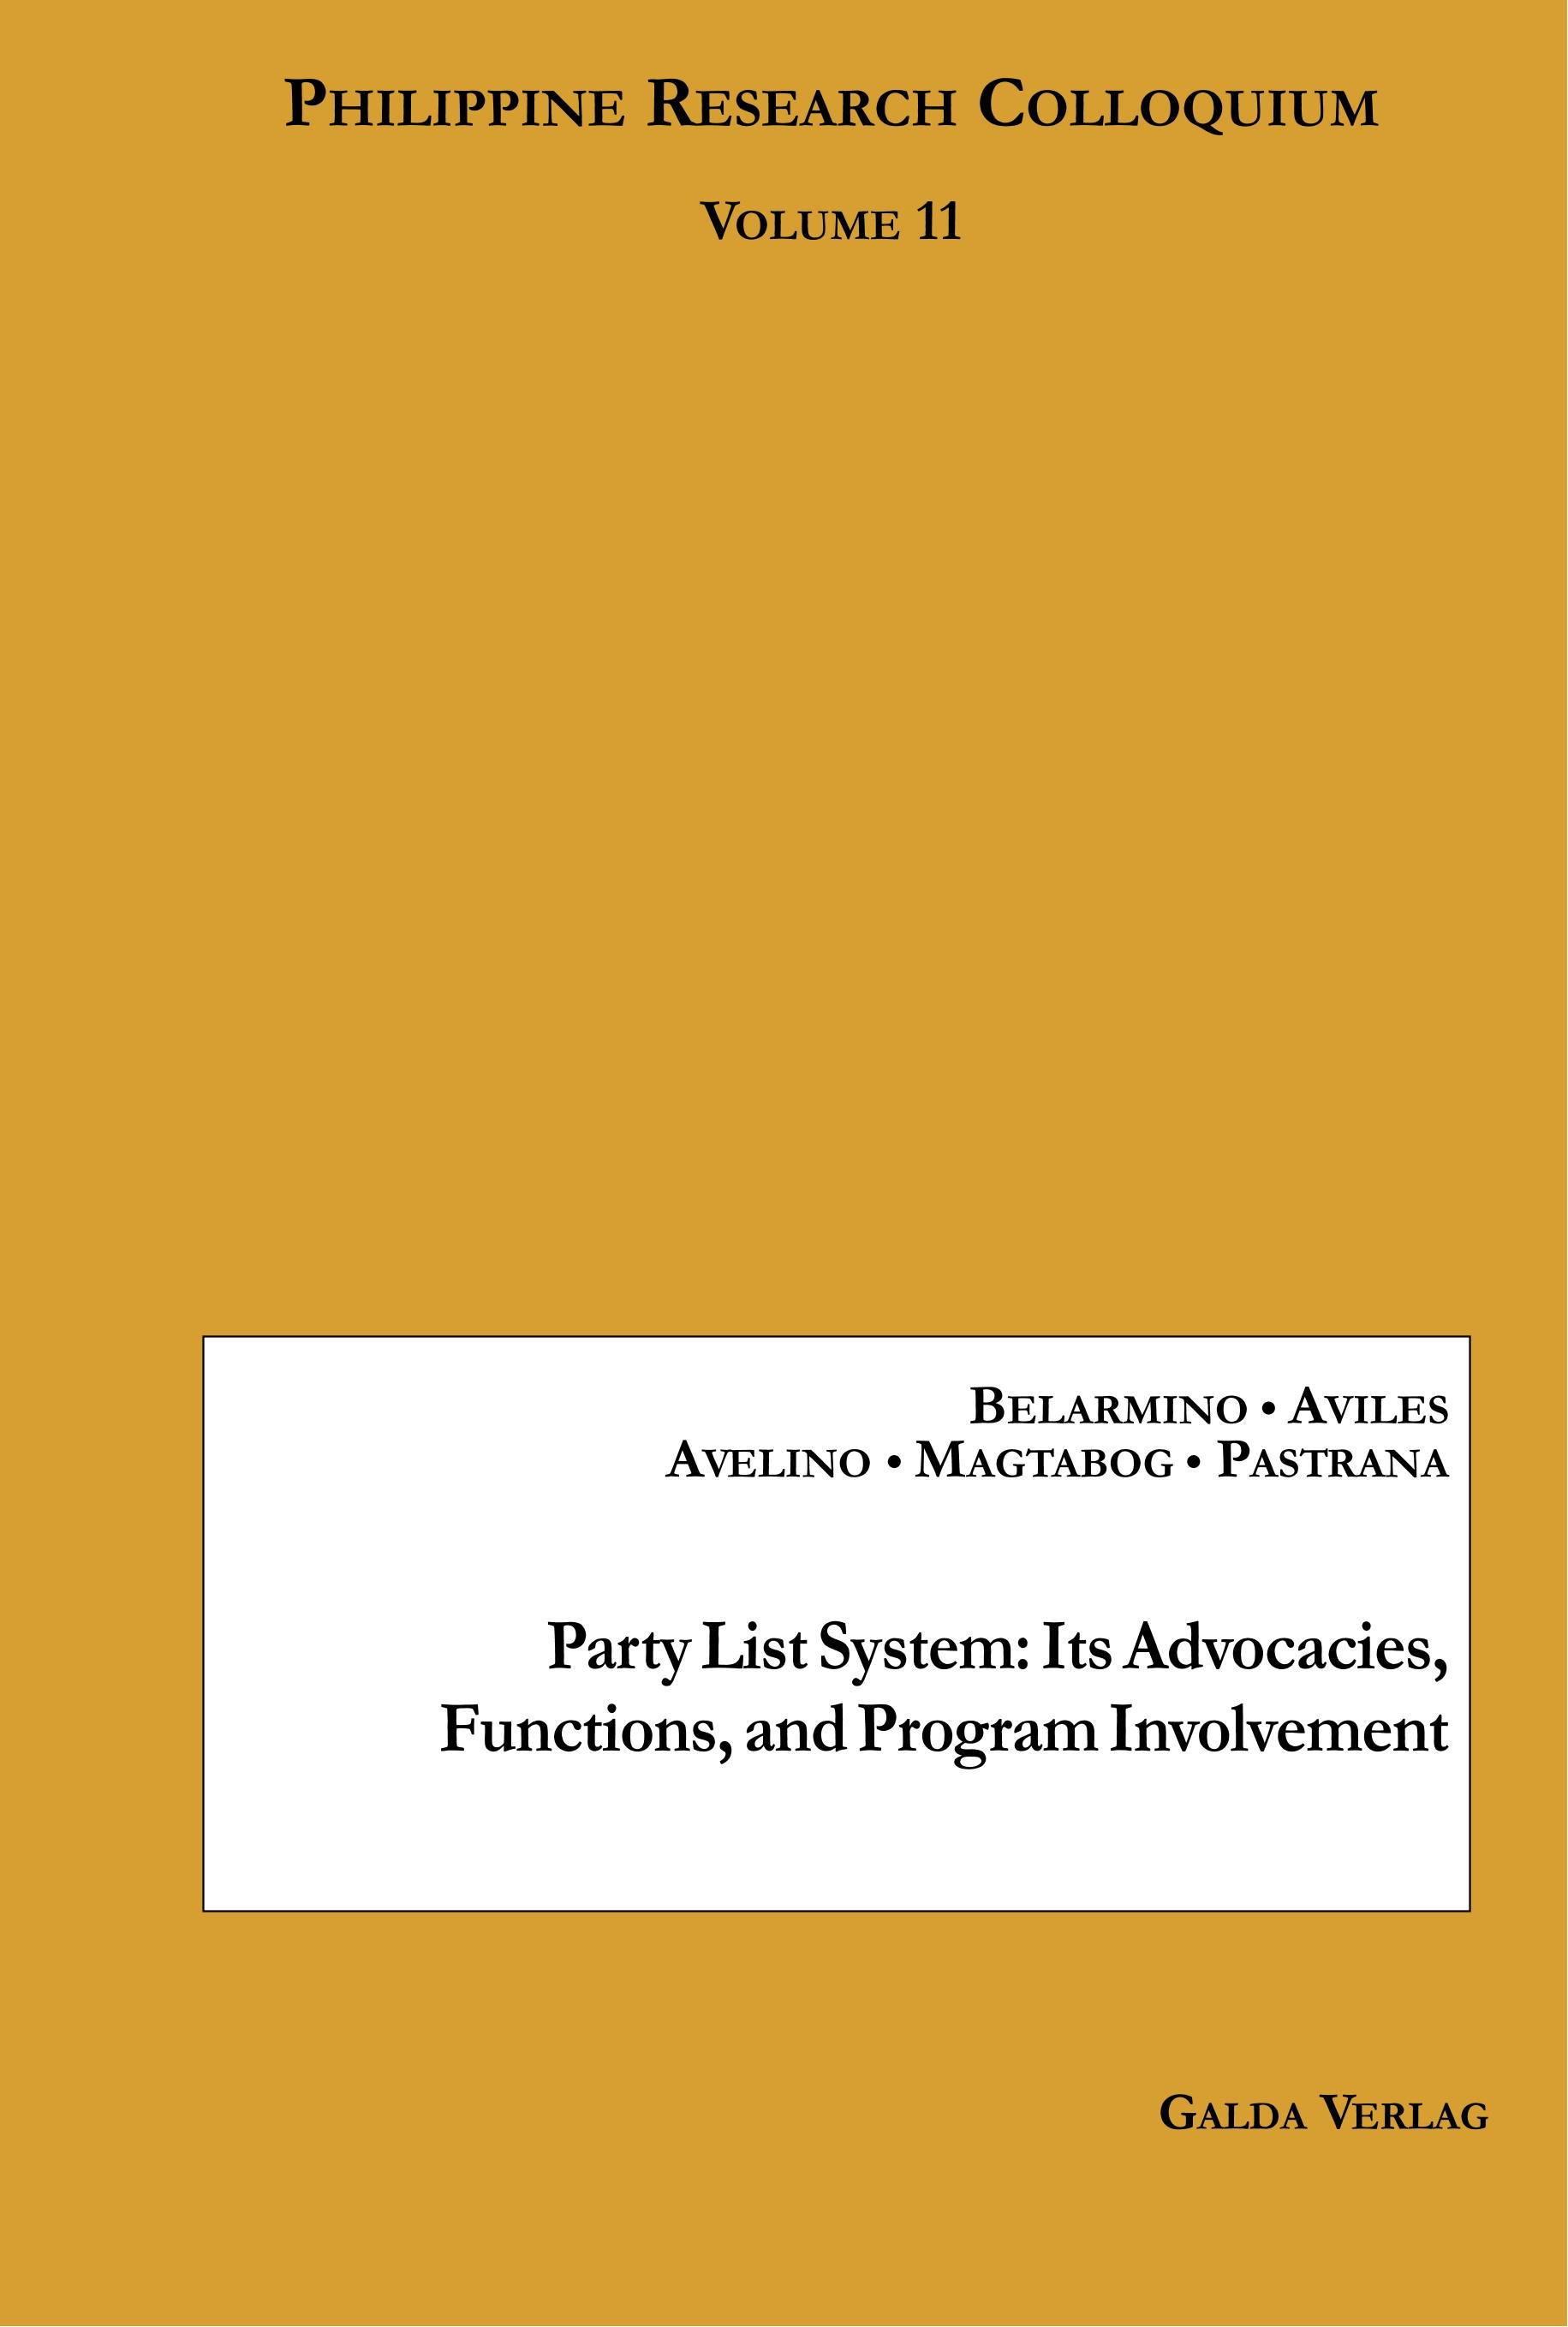 Party List System: Its Advocacies, Functions, And Program Involvement - Angelito Y. Aviles, Alexis Belarmino, Jhon Vincent M. Avelino, Neil Adrian C. Pastrana